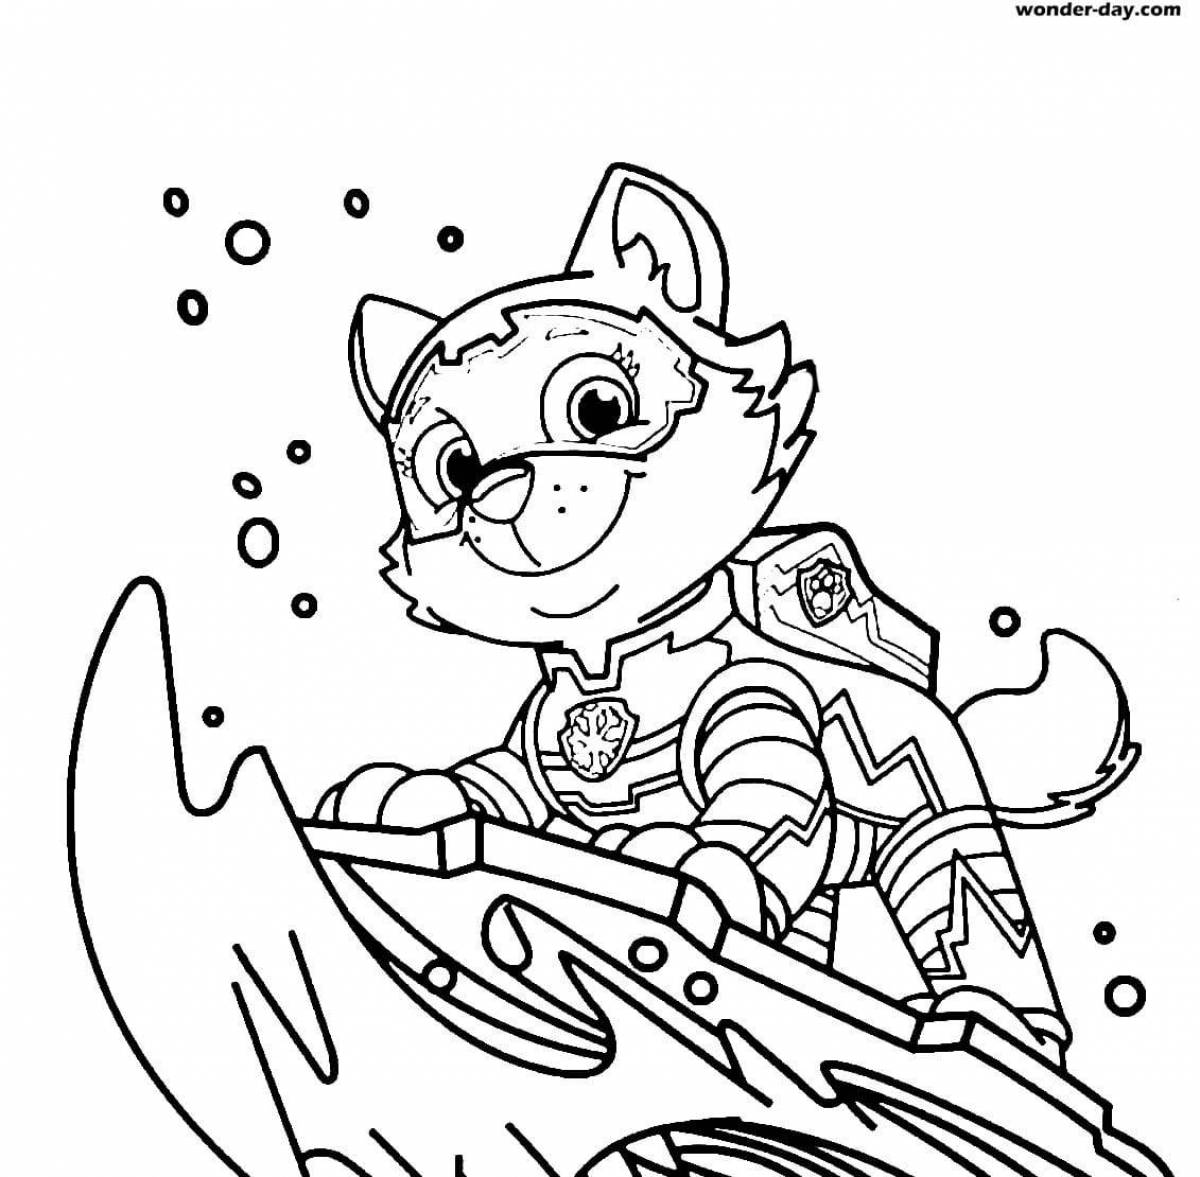 Coloring page wonderful paw patrol on everest